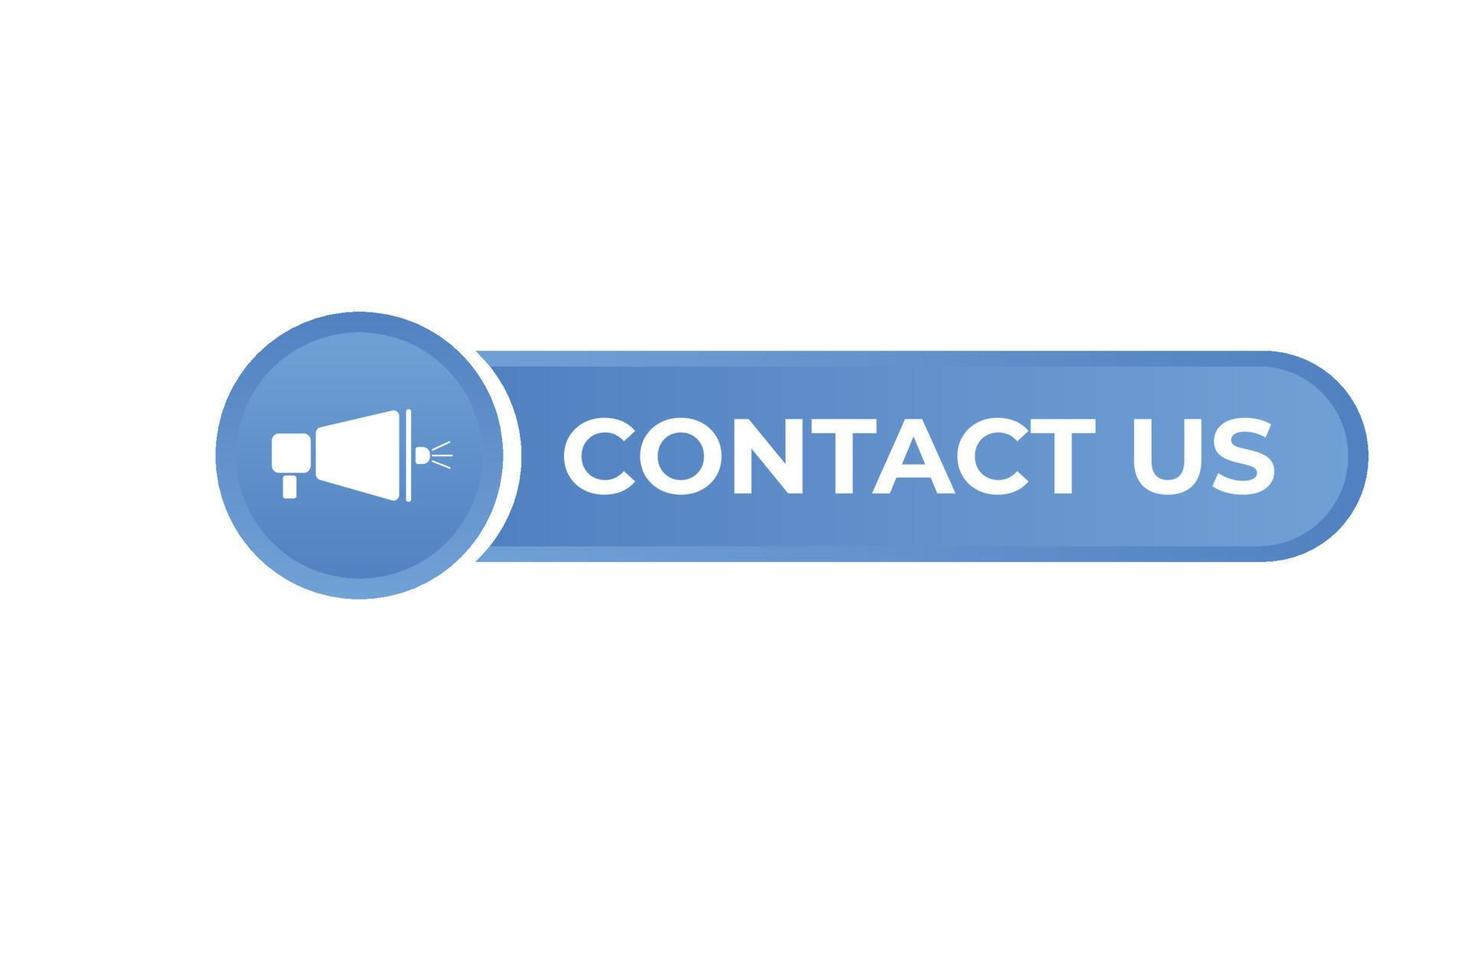 Contact Us Button. web template, Speech Bubble, Banner Label Contact Us. sign icon Vector illustration